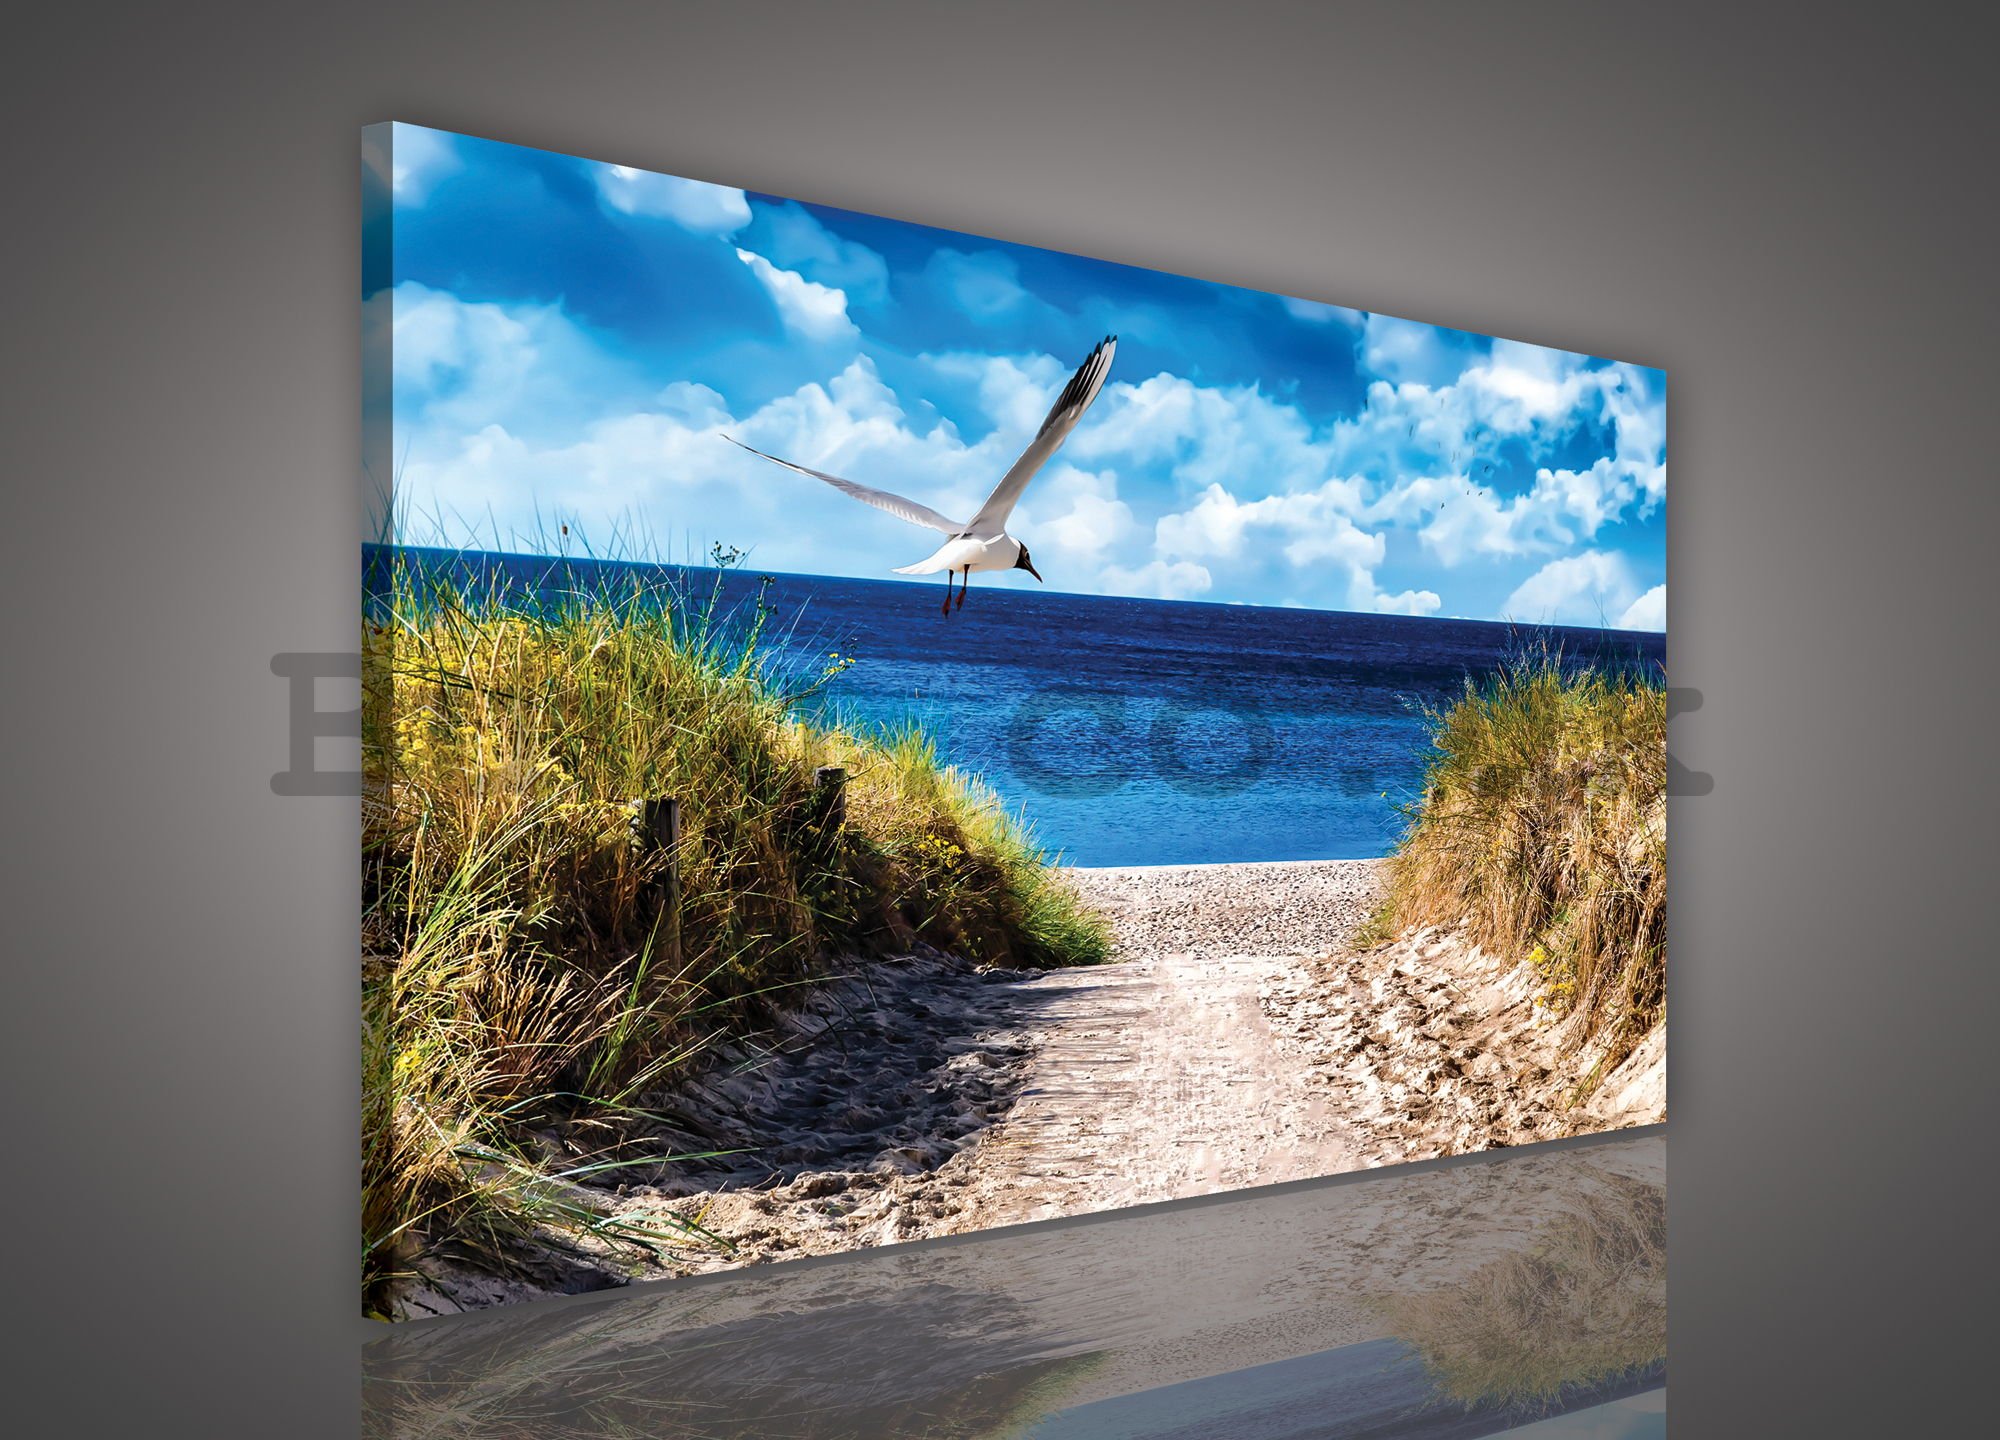 Painting on canvas: Way to the beach (7) - 75x100 cm